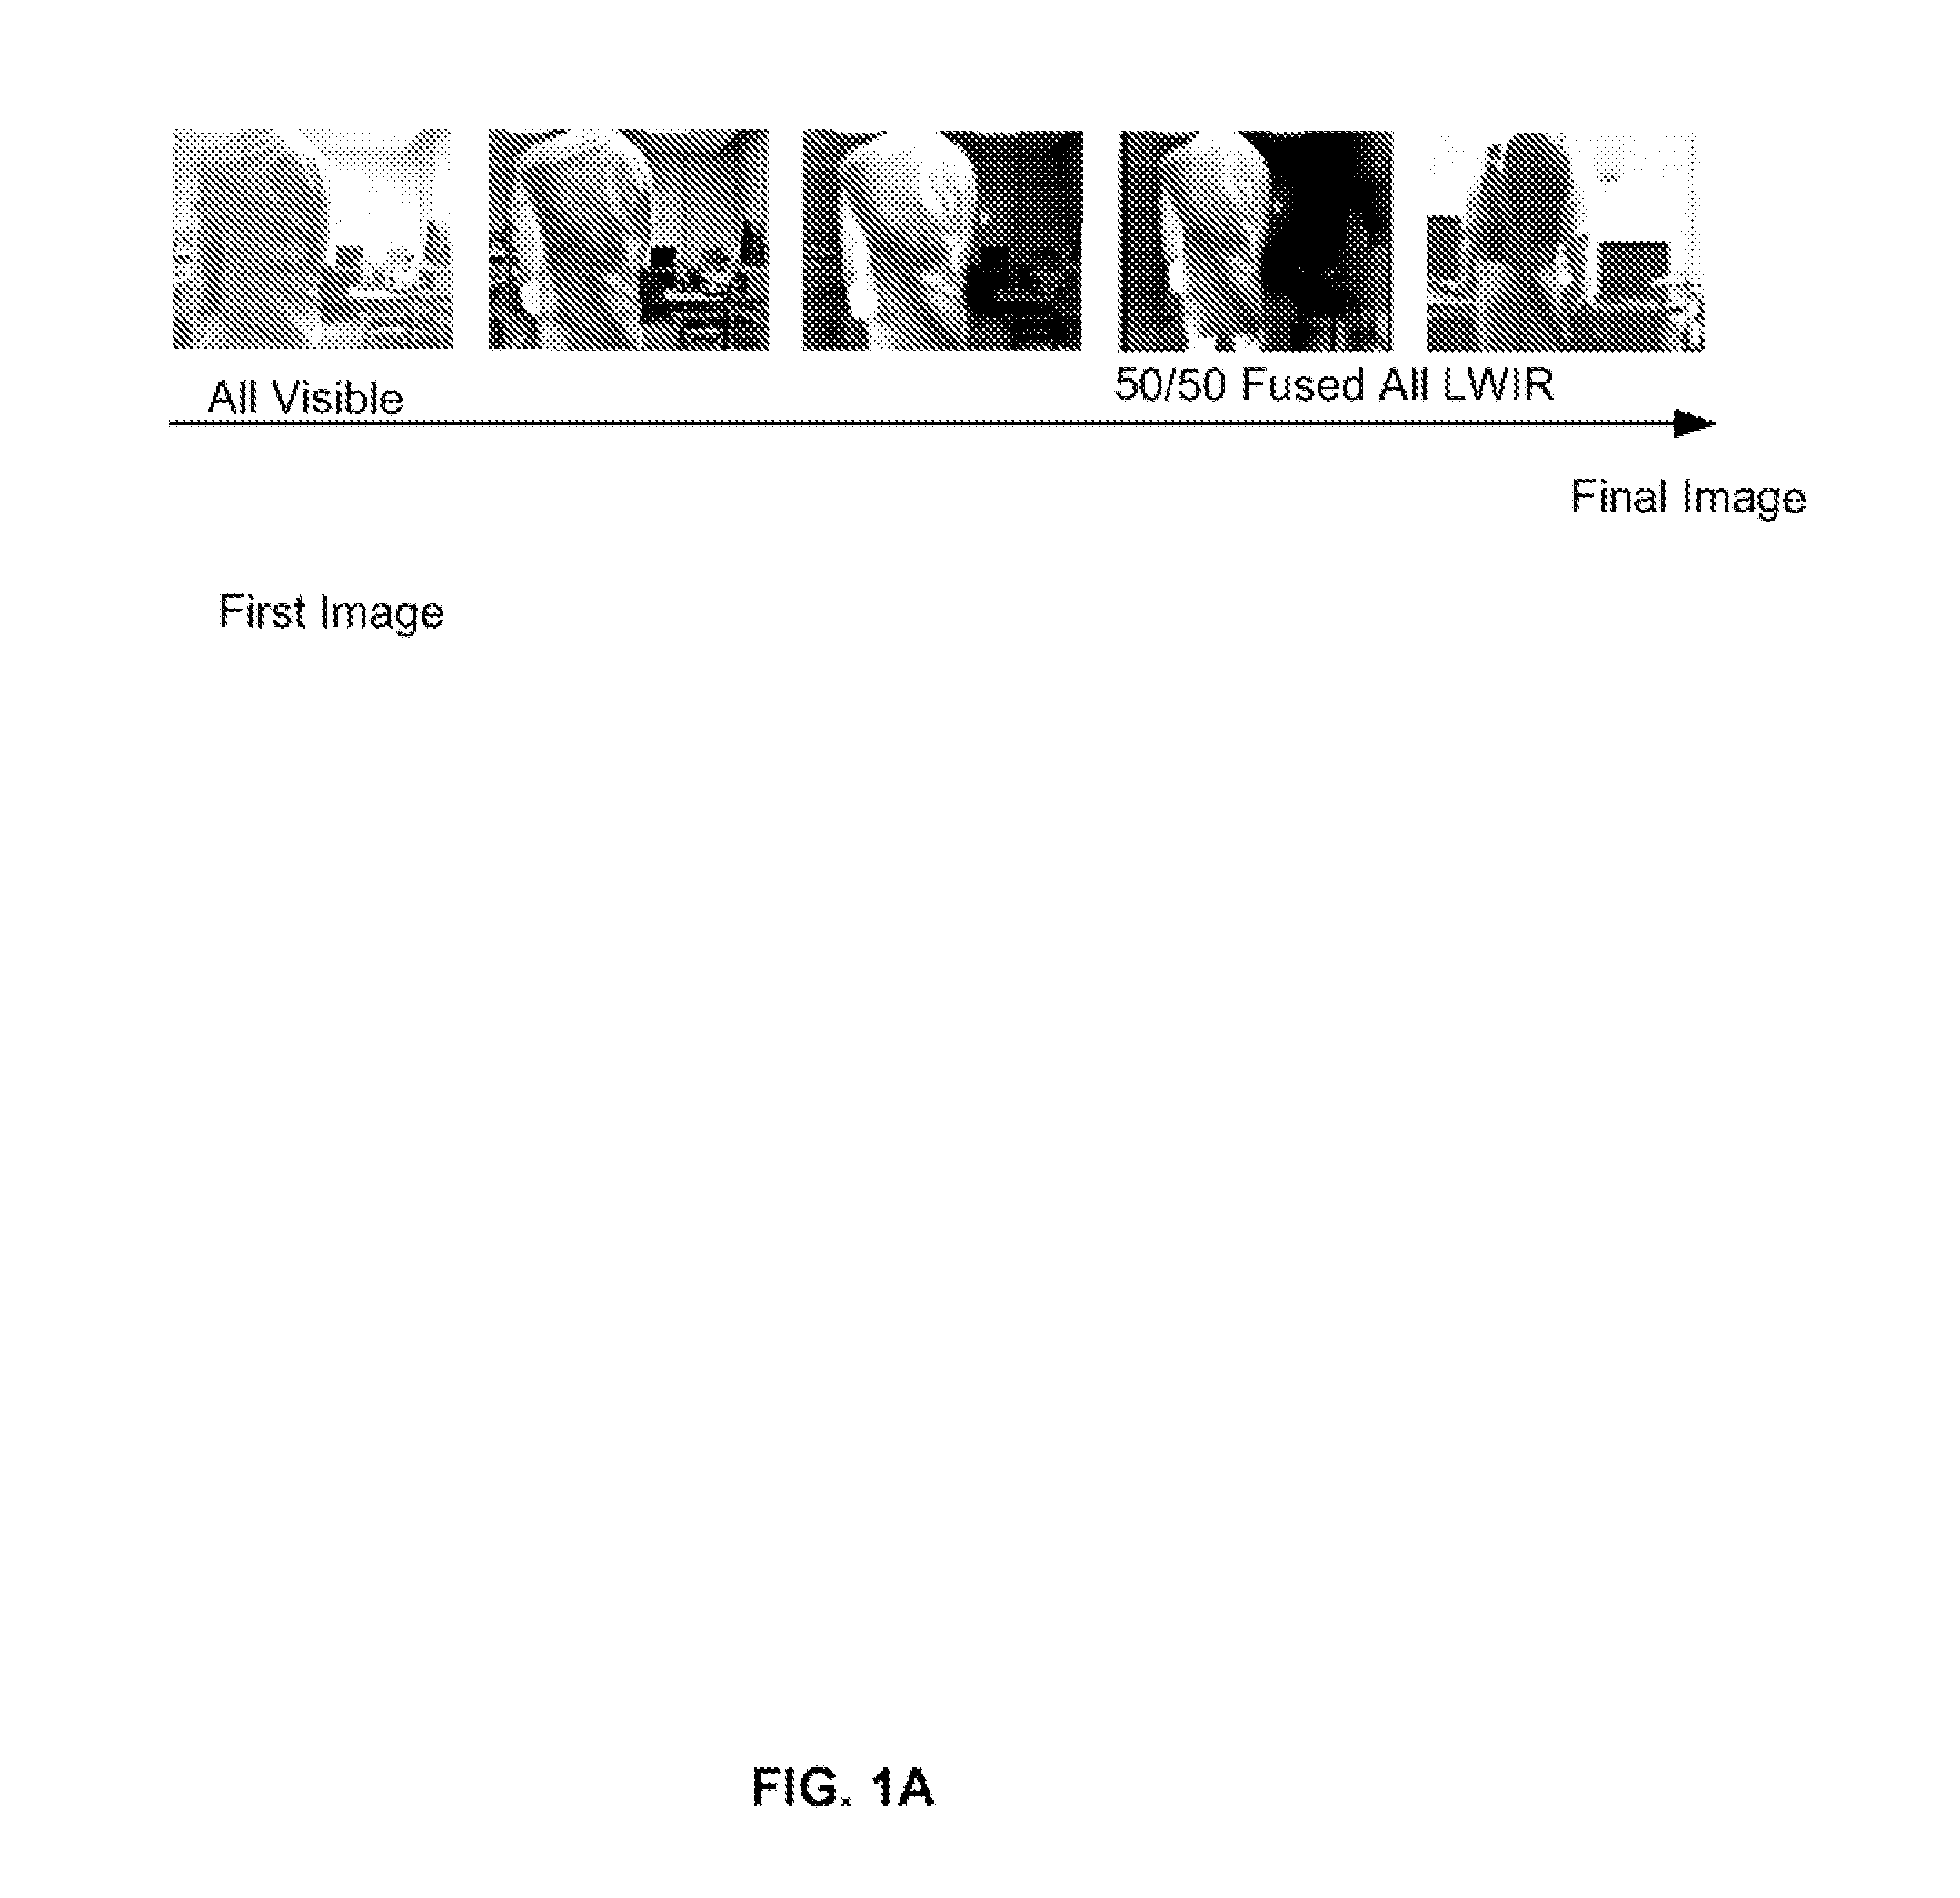 Optical image systems